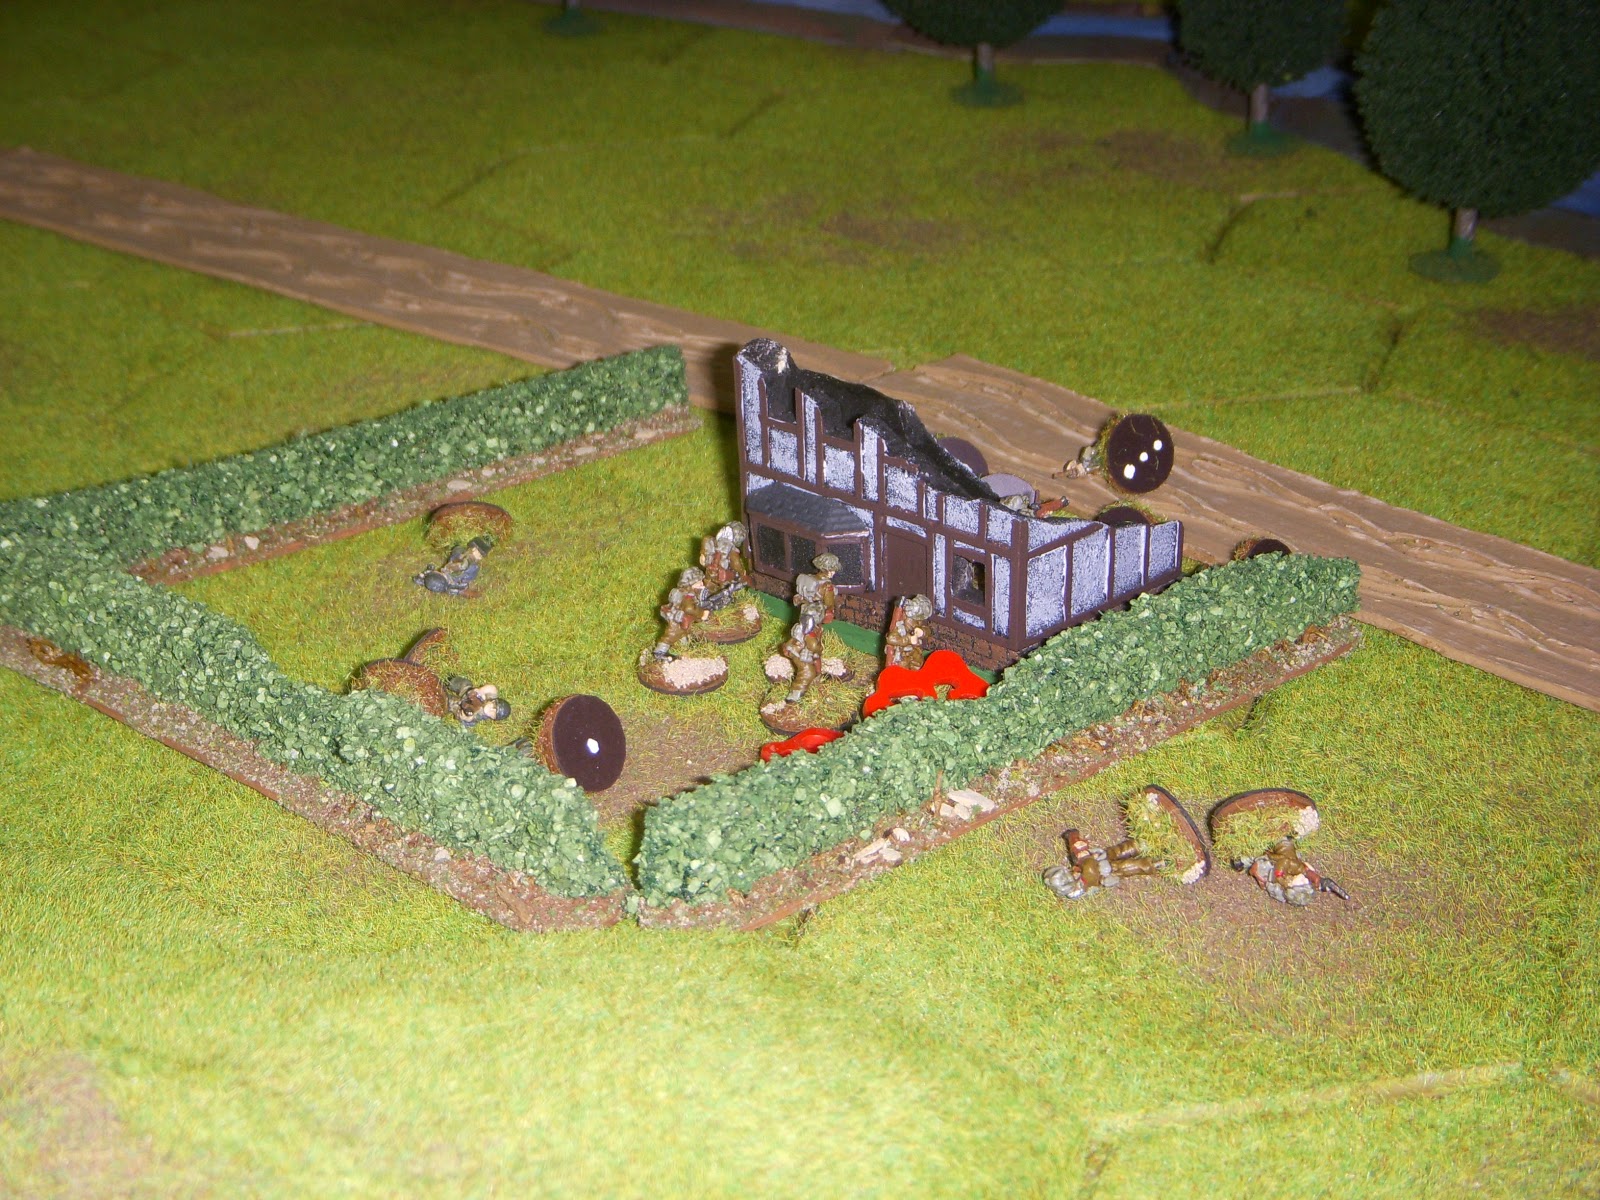  Then they captured the objective by the road to force the Germans to retreat. 